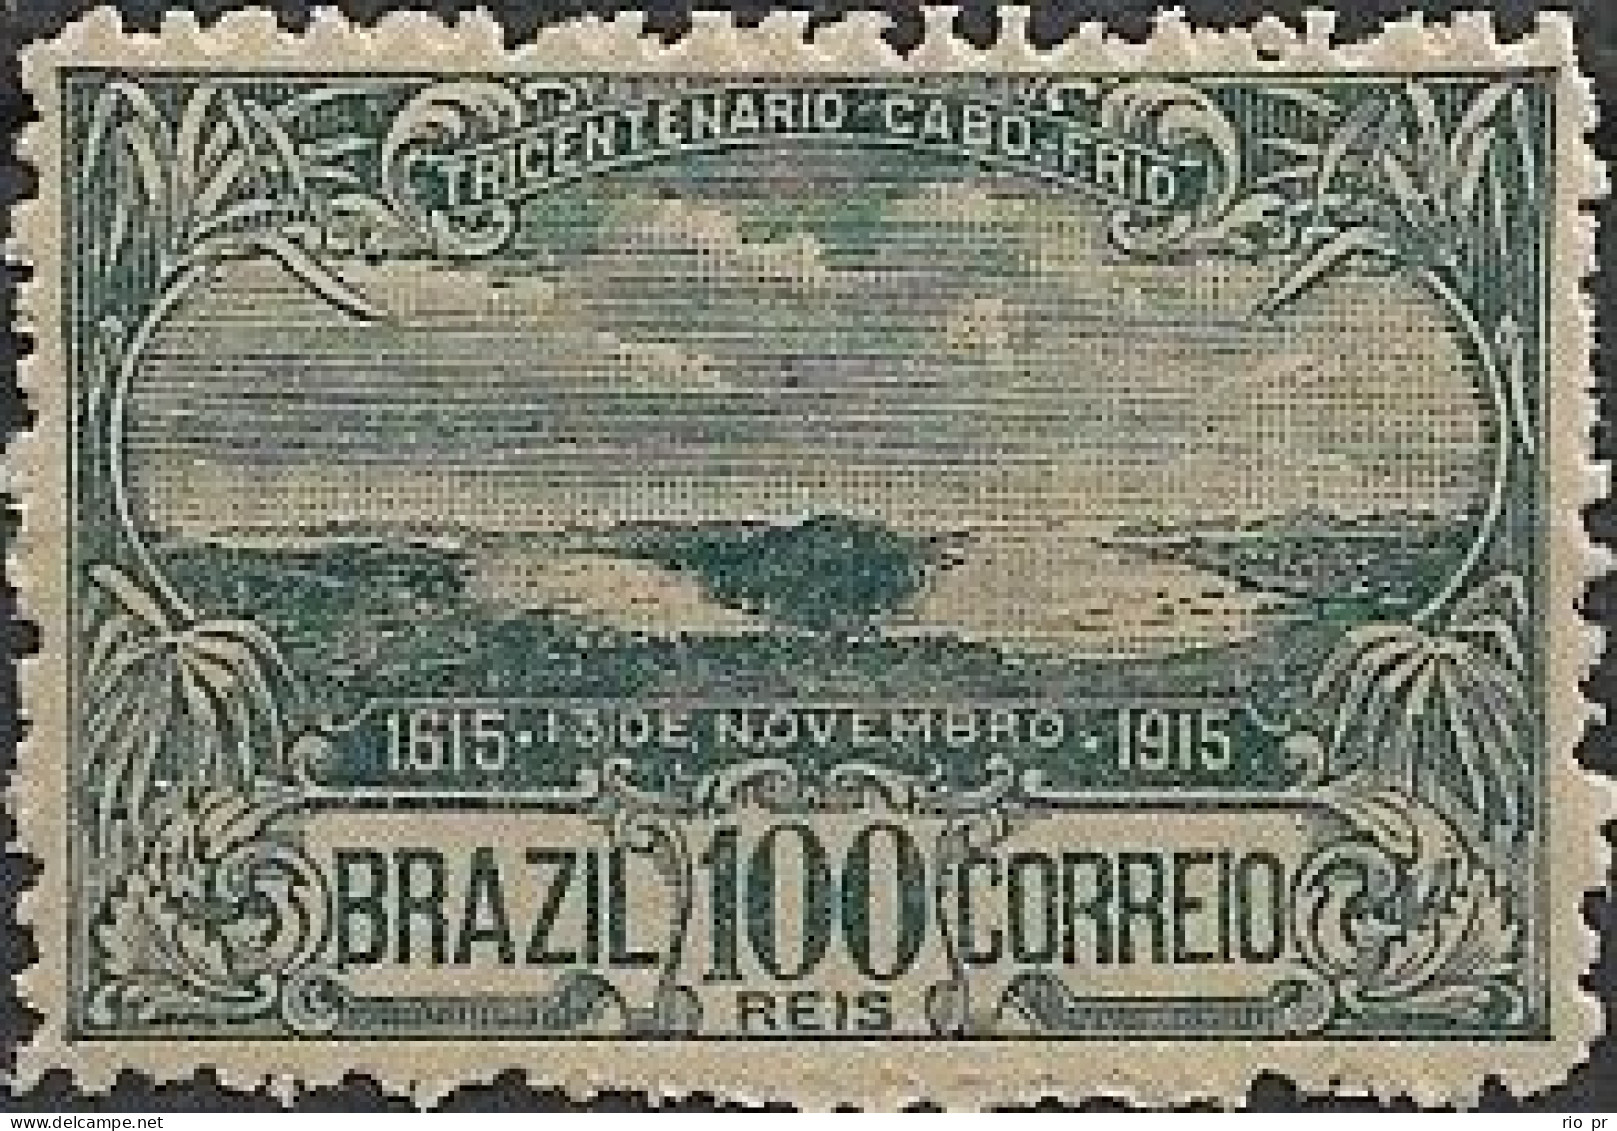 BRAZIL - 3rd CENTENARY OF THE CITY OF CABO FRIO/RJ 1915 - MNH - Unused Stamps